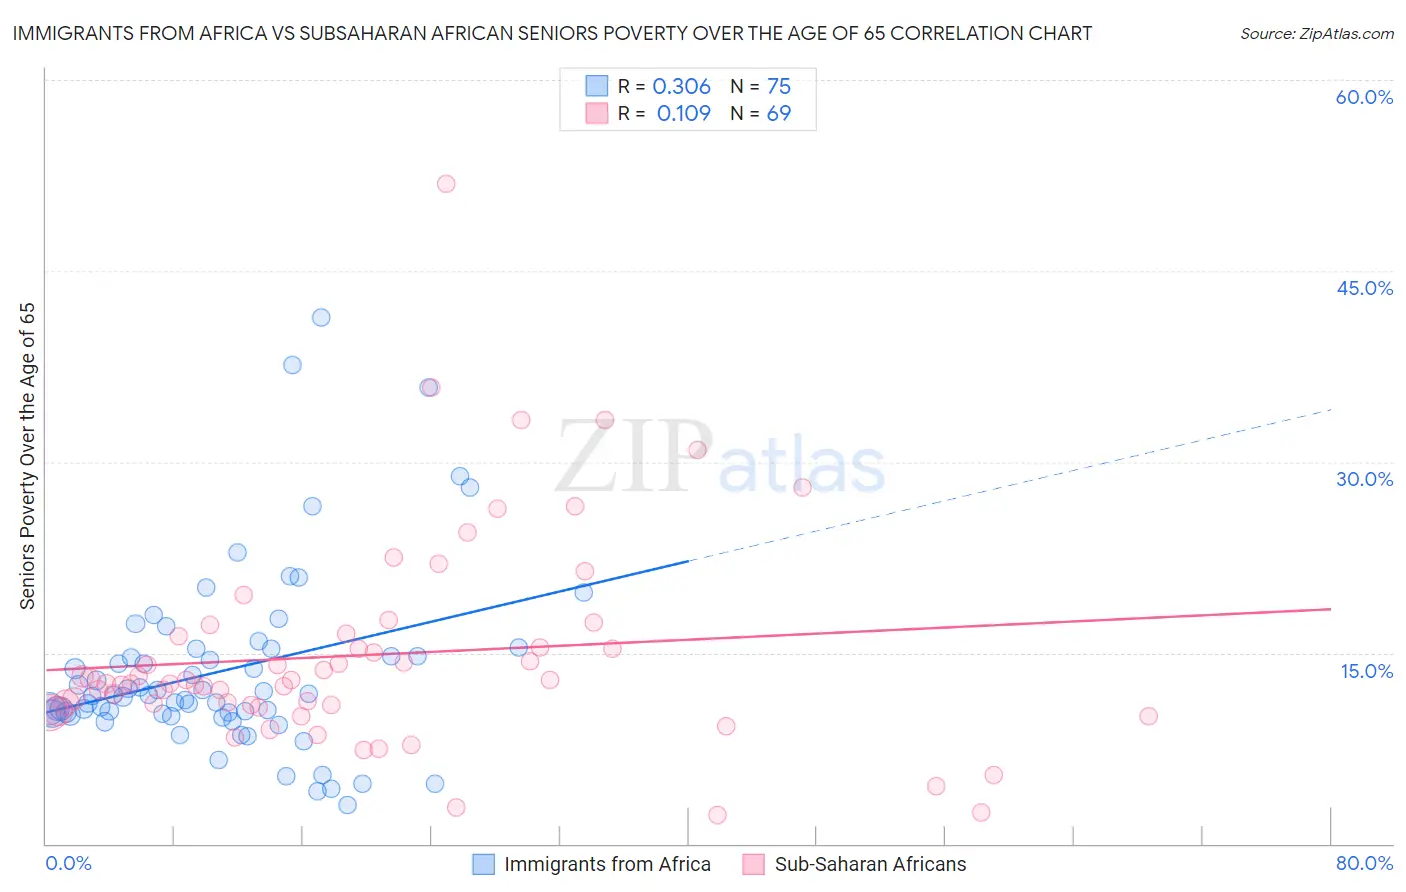 Immigrants from Africa vs Subsaharan African Seniors Poverty Over the Age of 65